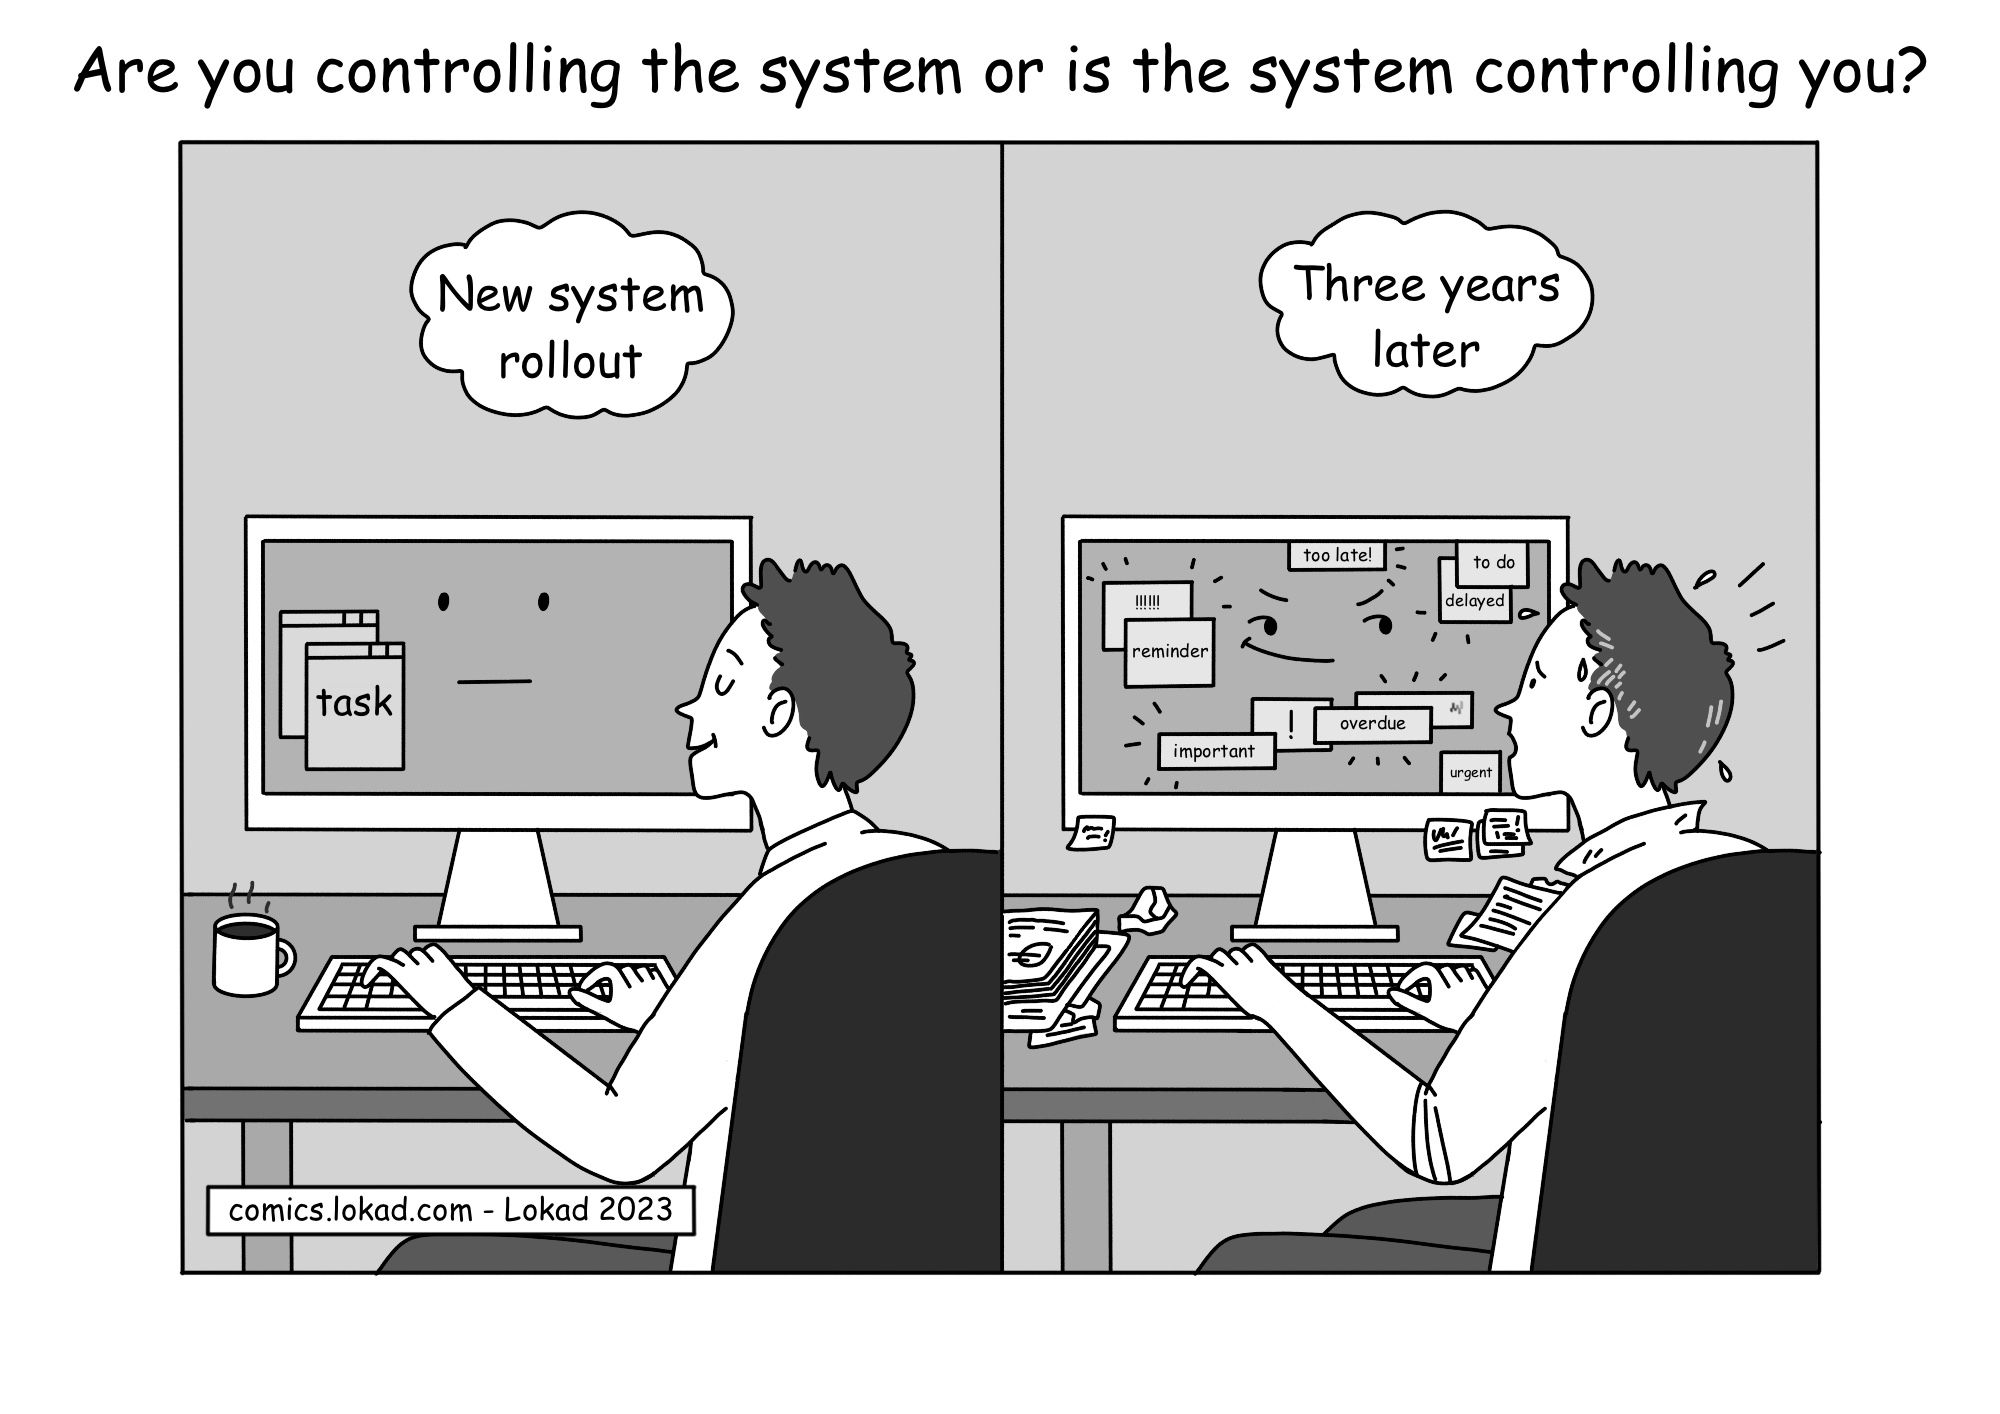 Are you controlling the system or is the system controlling you?